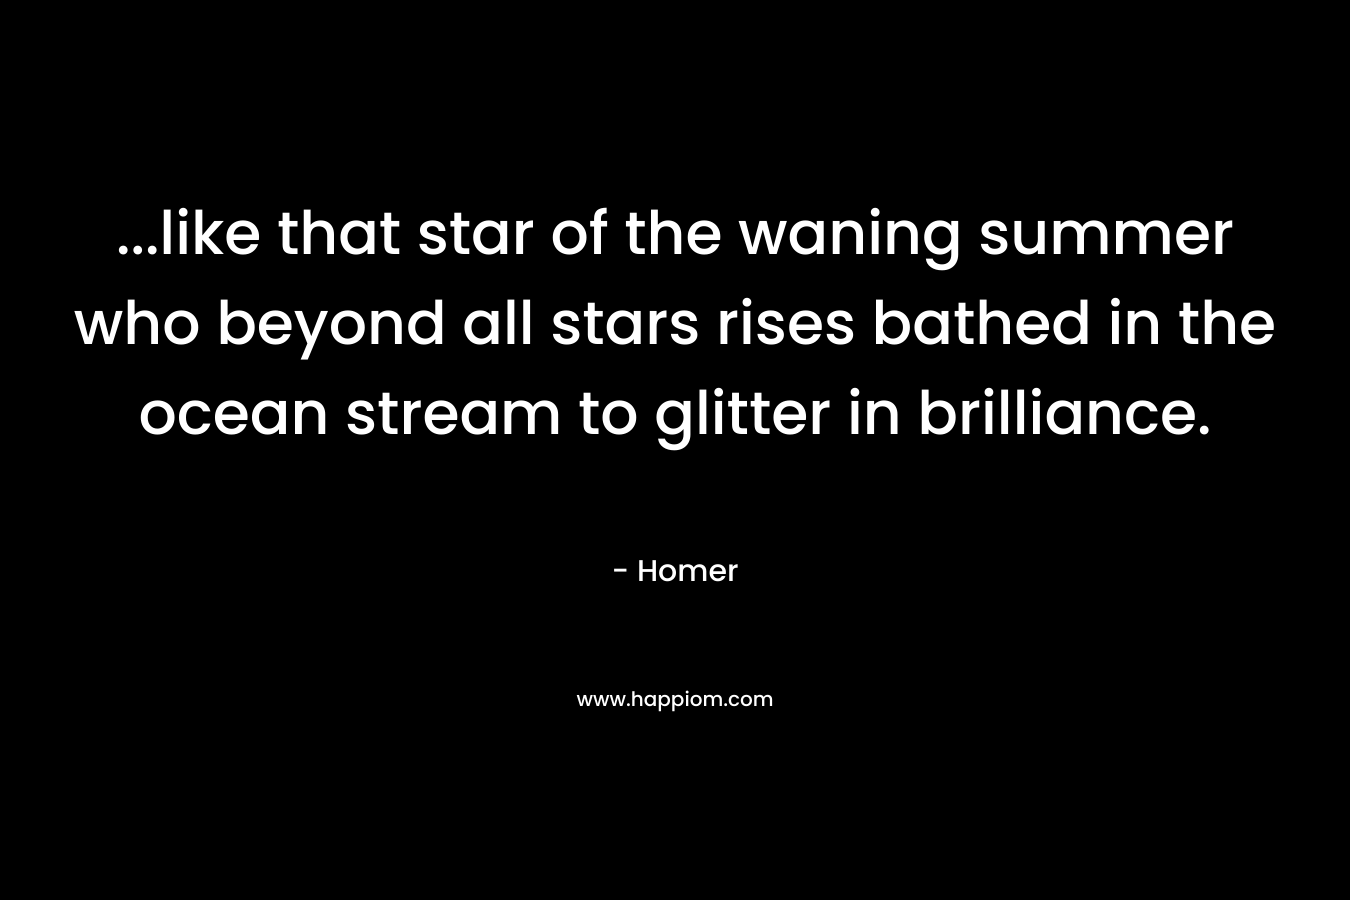 …like that star of the waning summer who beyond all stars rises bathed in the ocean stream to glitter in brilliance. – Homer